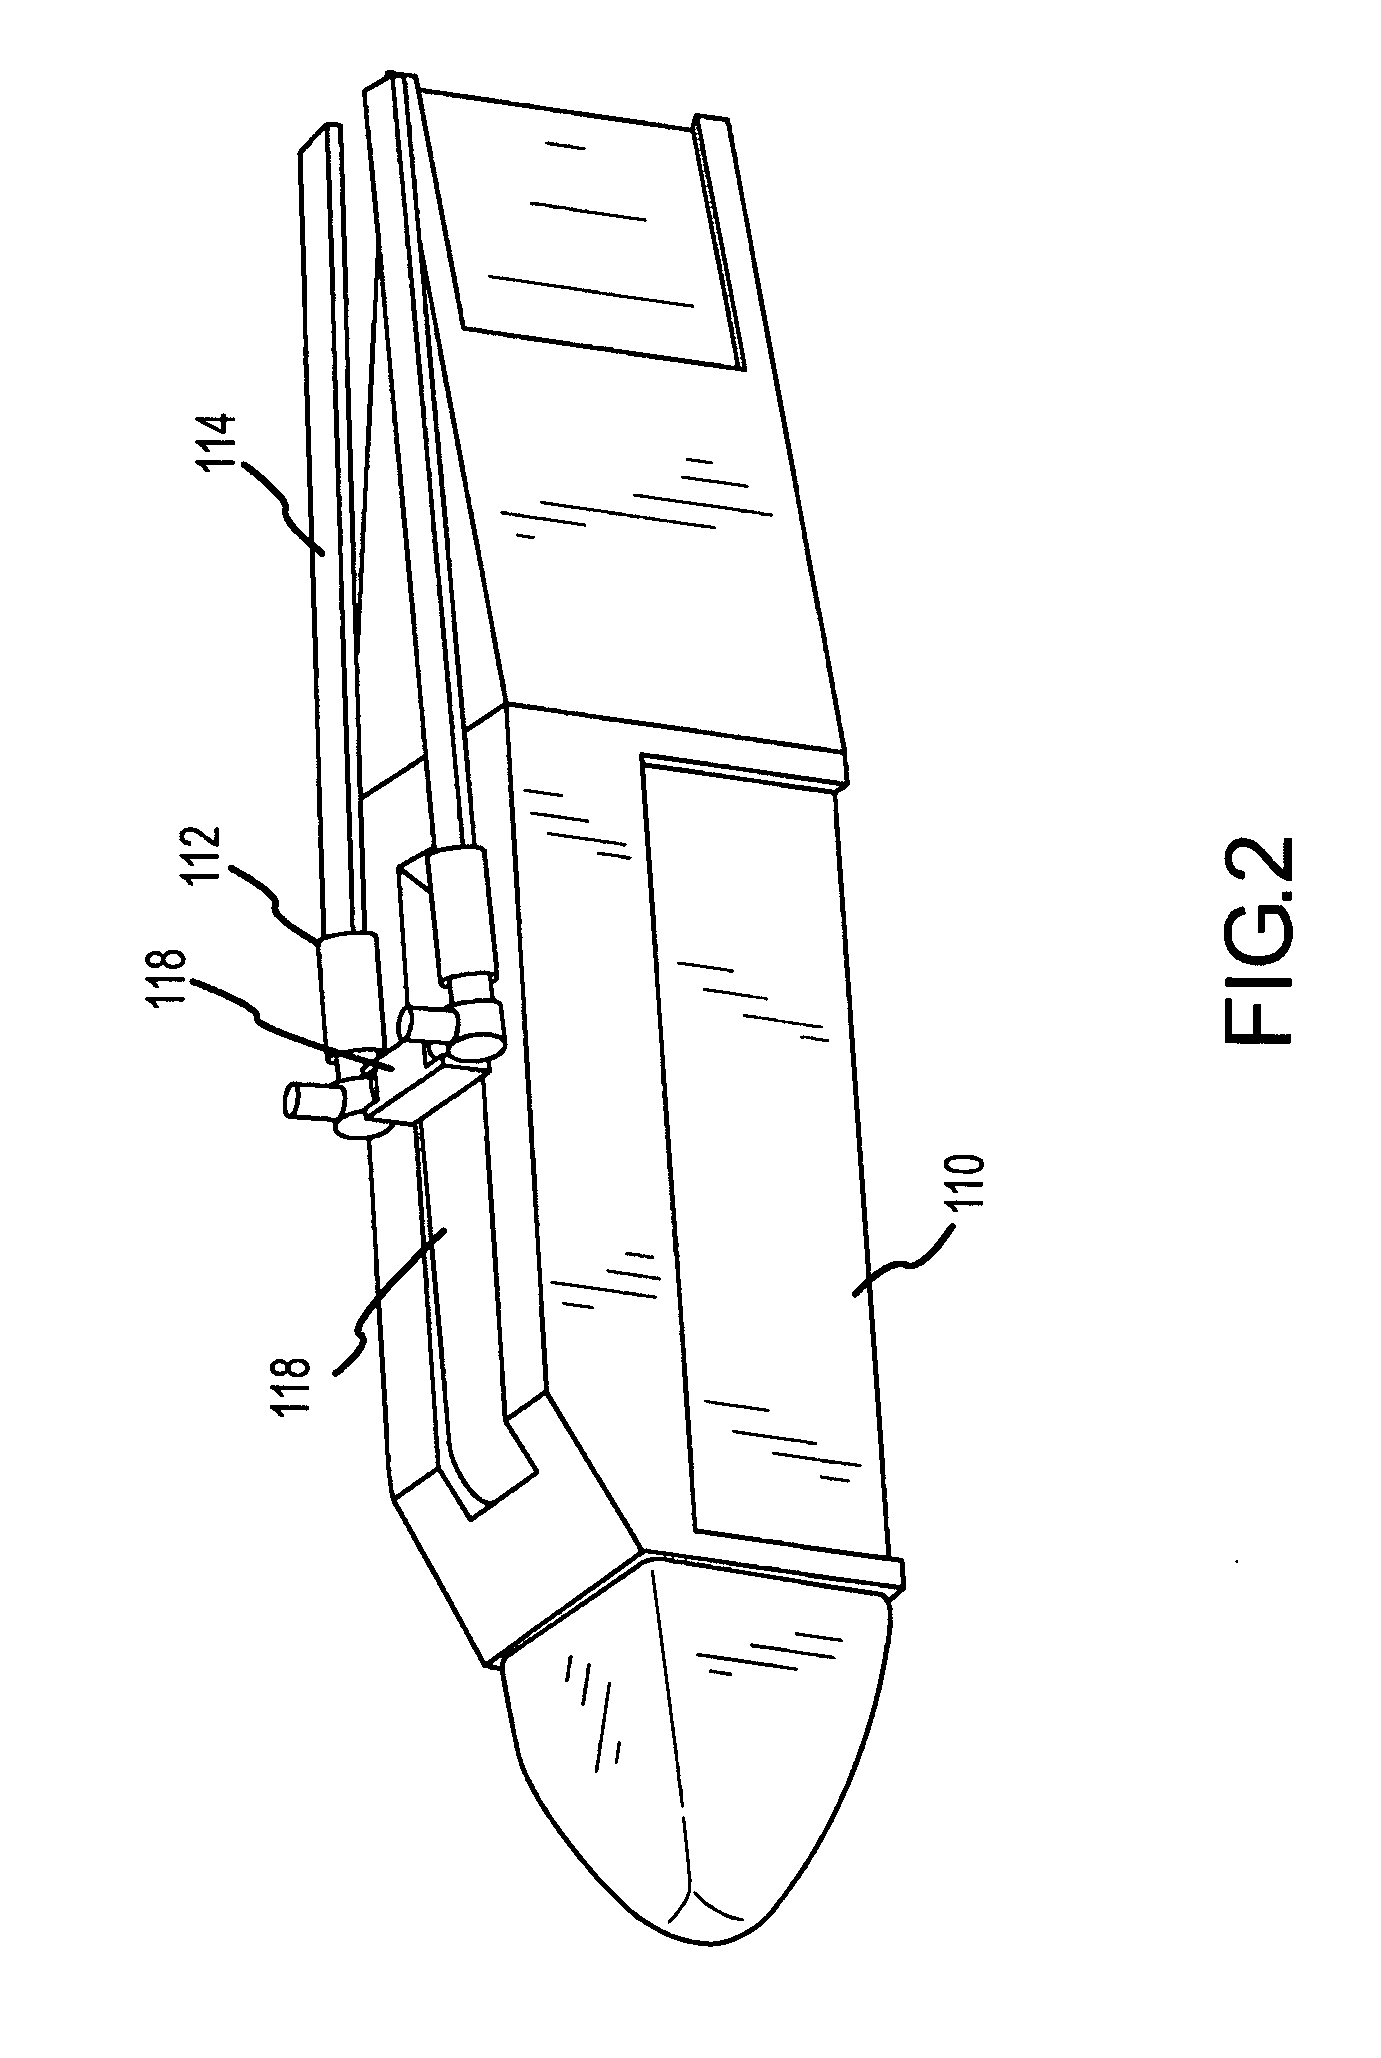 Methods and apparatus for airborne systems